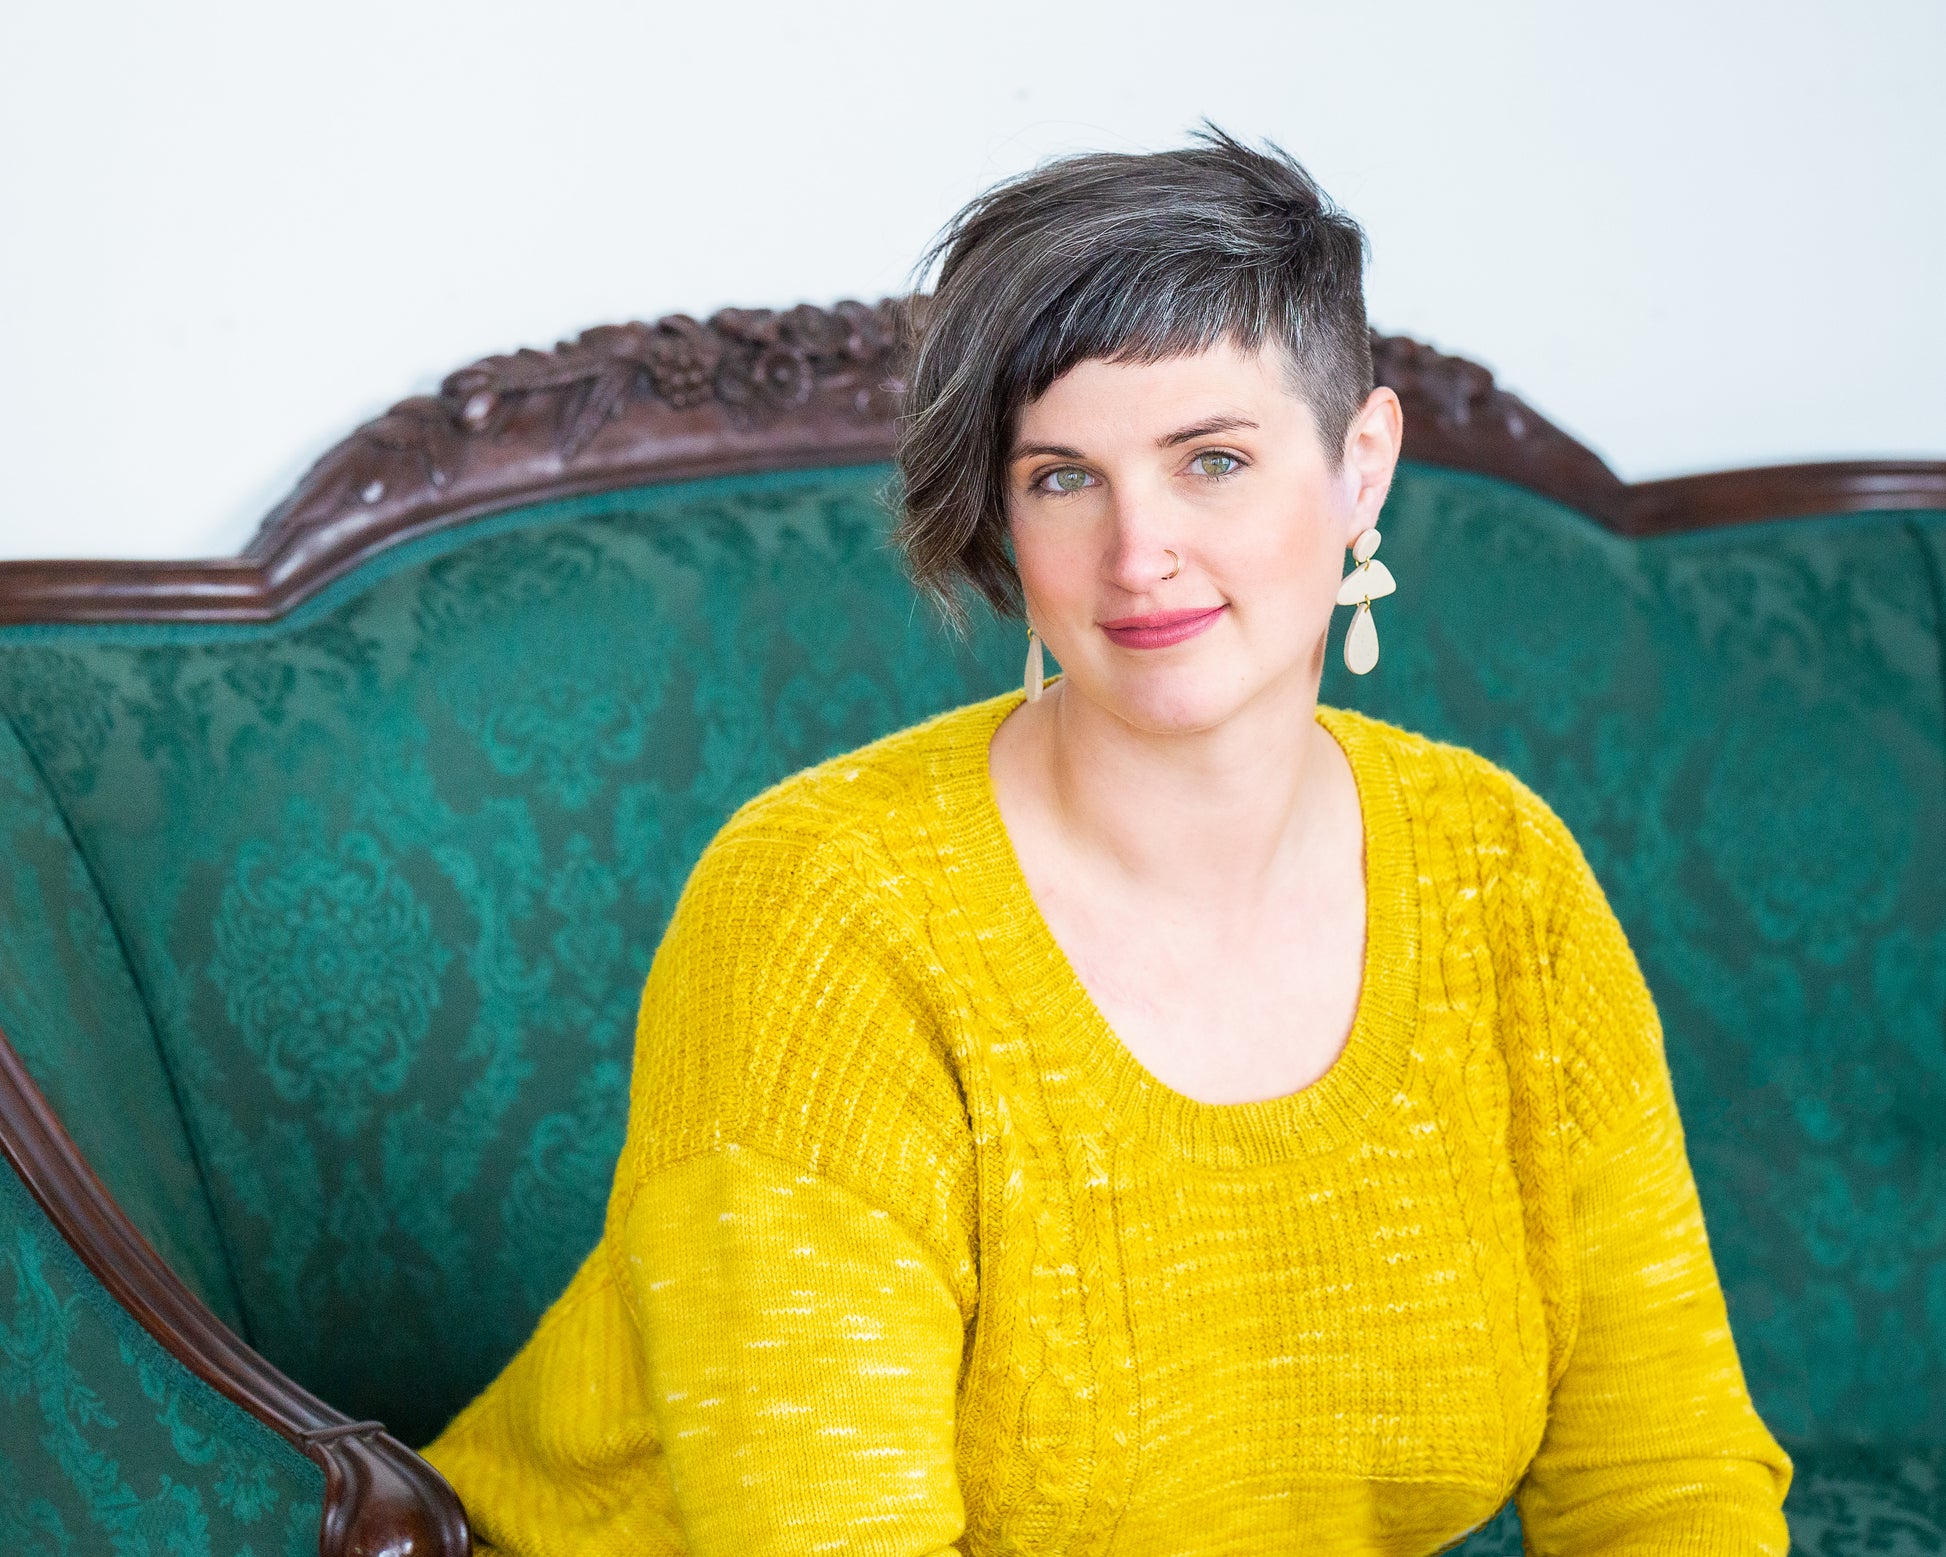 Jen sits on a green couch, leaning forward and smiling at the camera. She wears a bright yellow pullover, featuring a scoop neck and knit with a cable and seed stitch design.